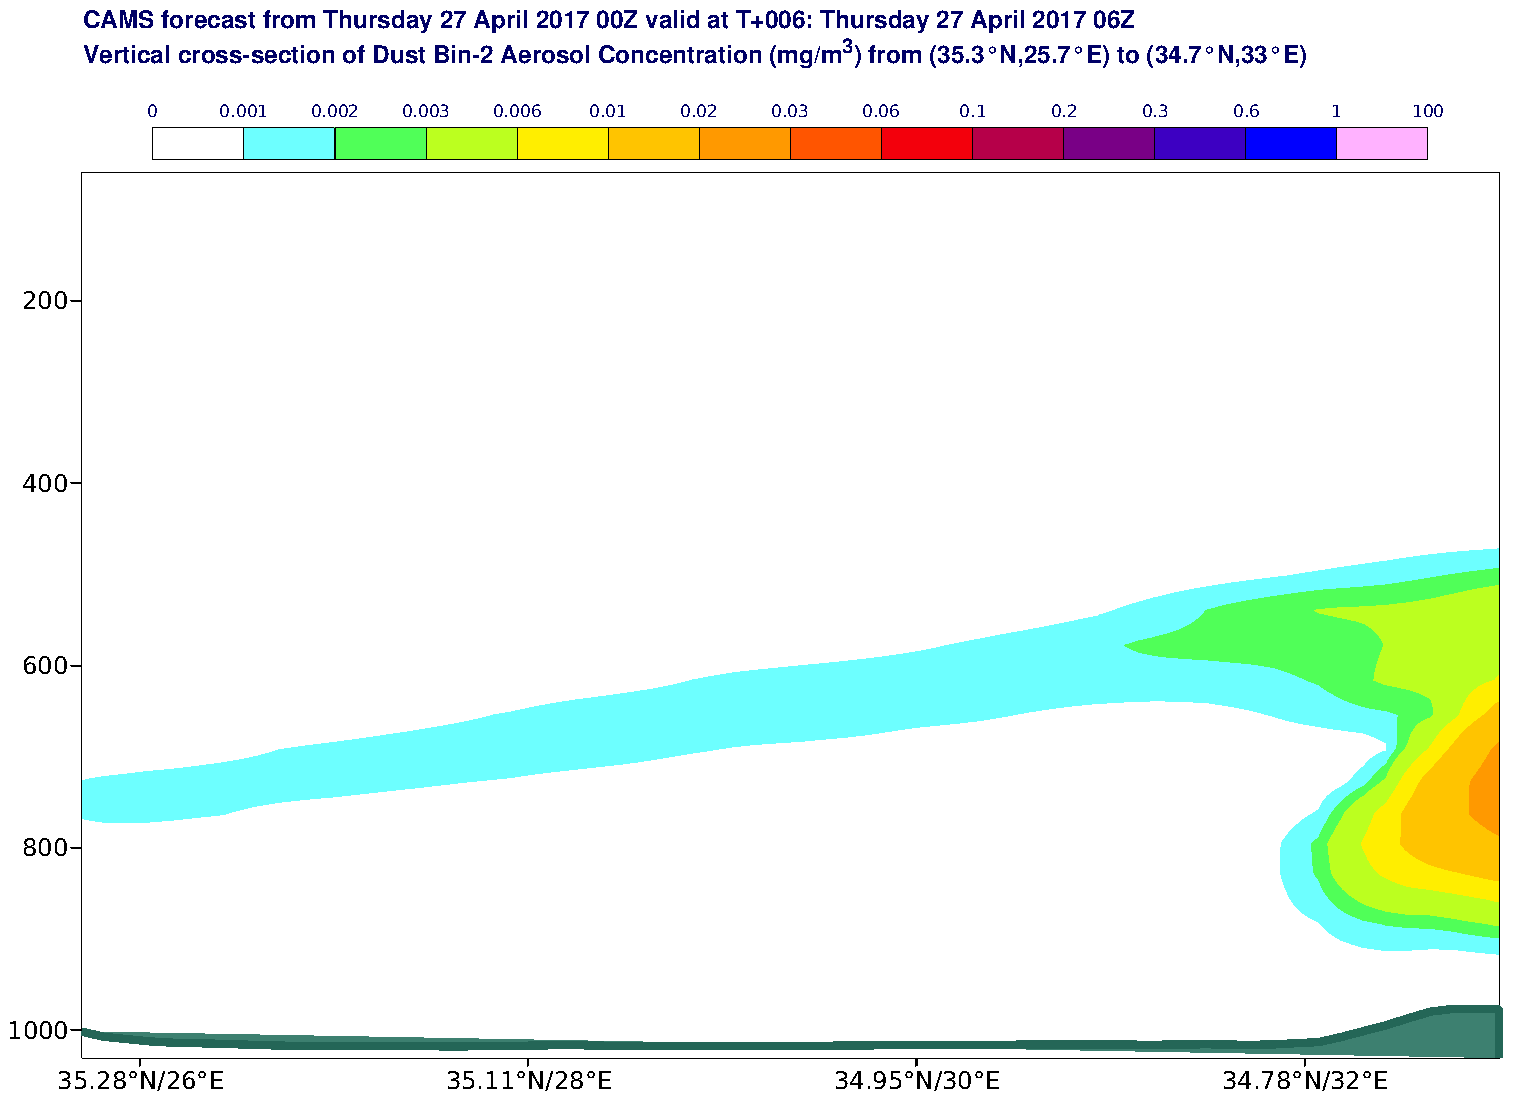 Vertical cross-section of Dust Bin-2 Aerosol Concentration (mg/m3) valid at T6 - 2017-04-27 06:00